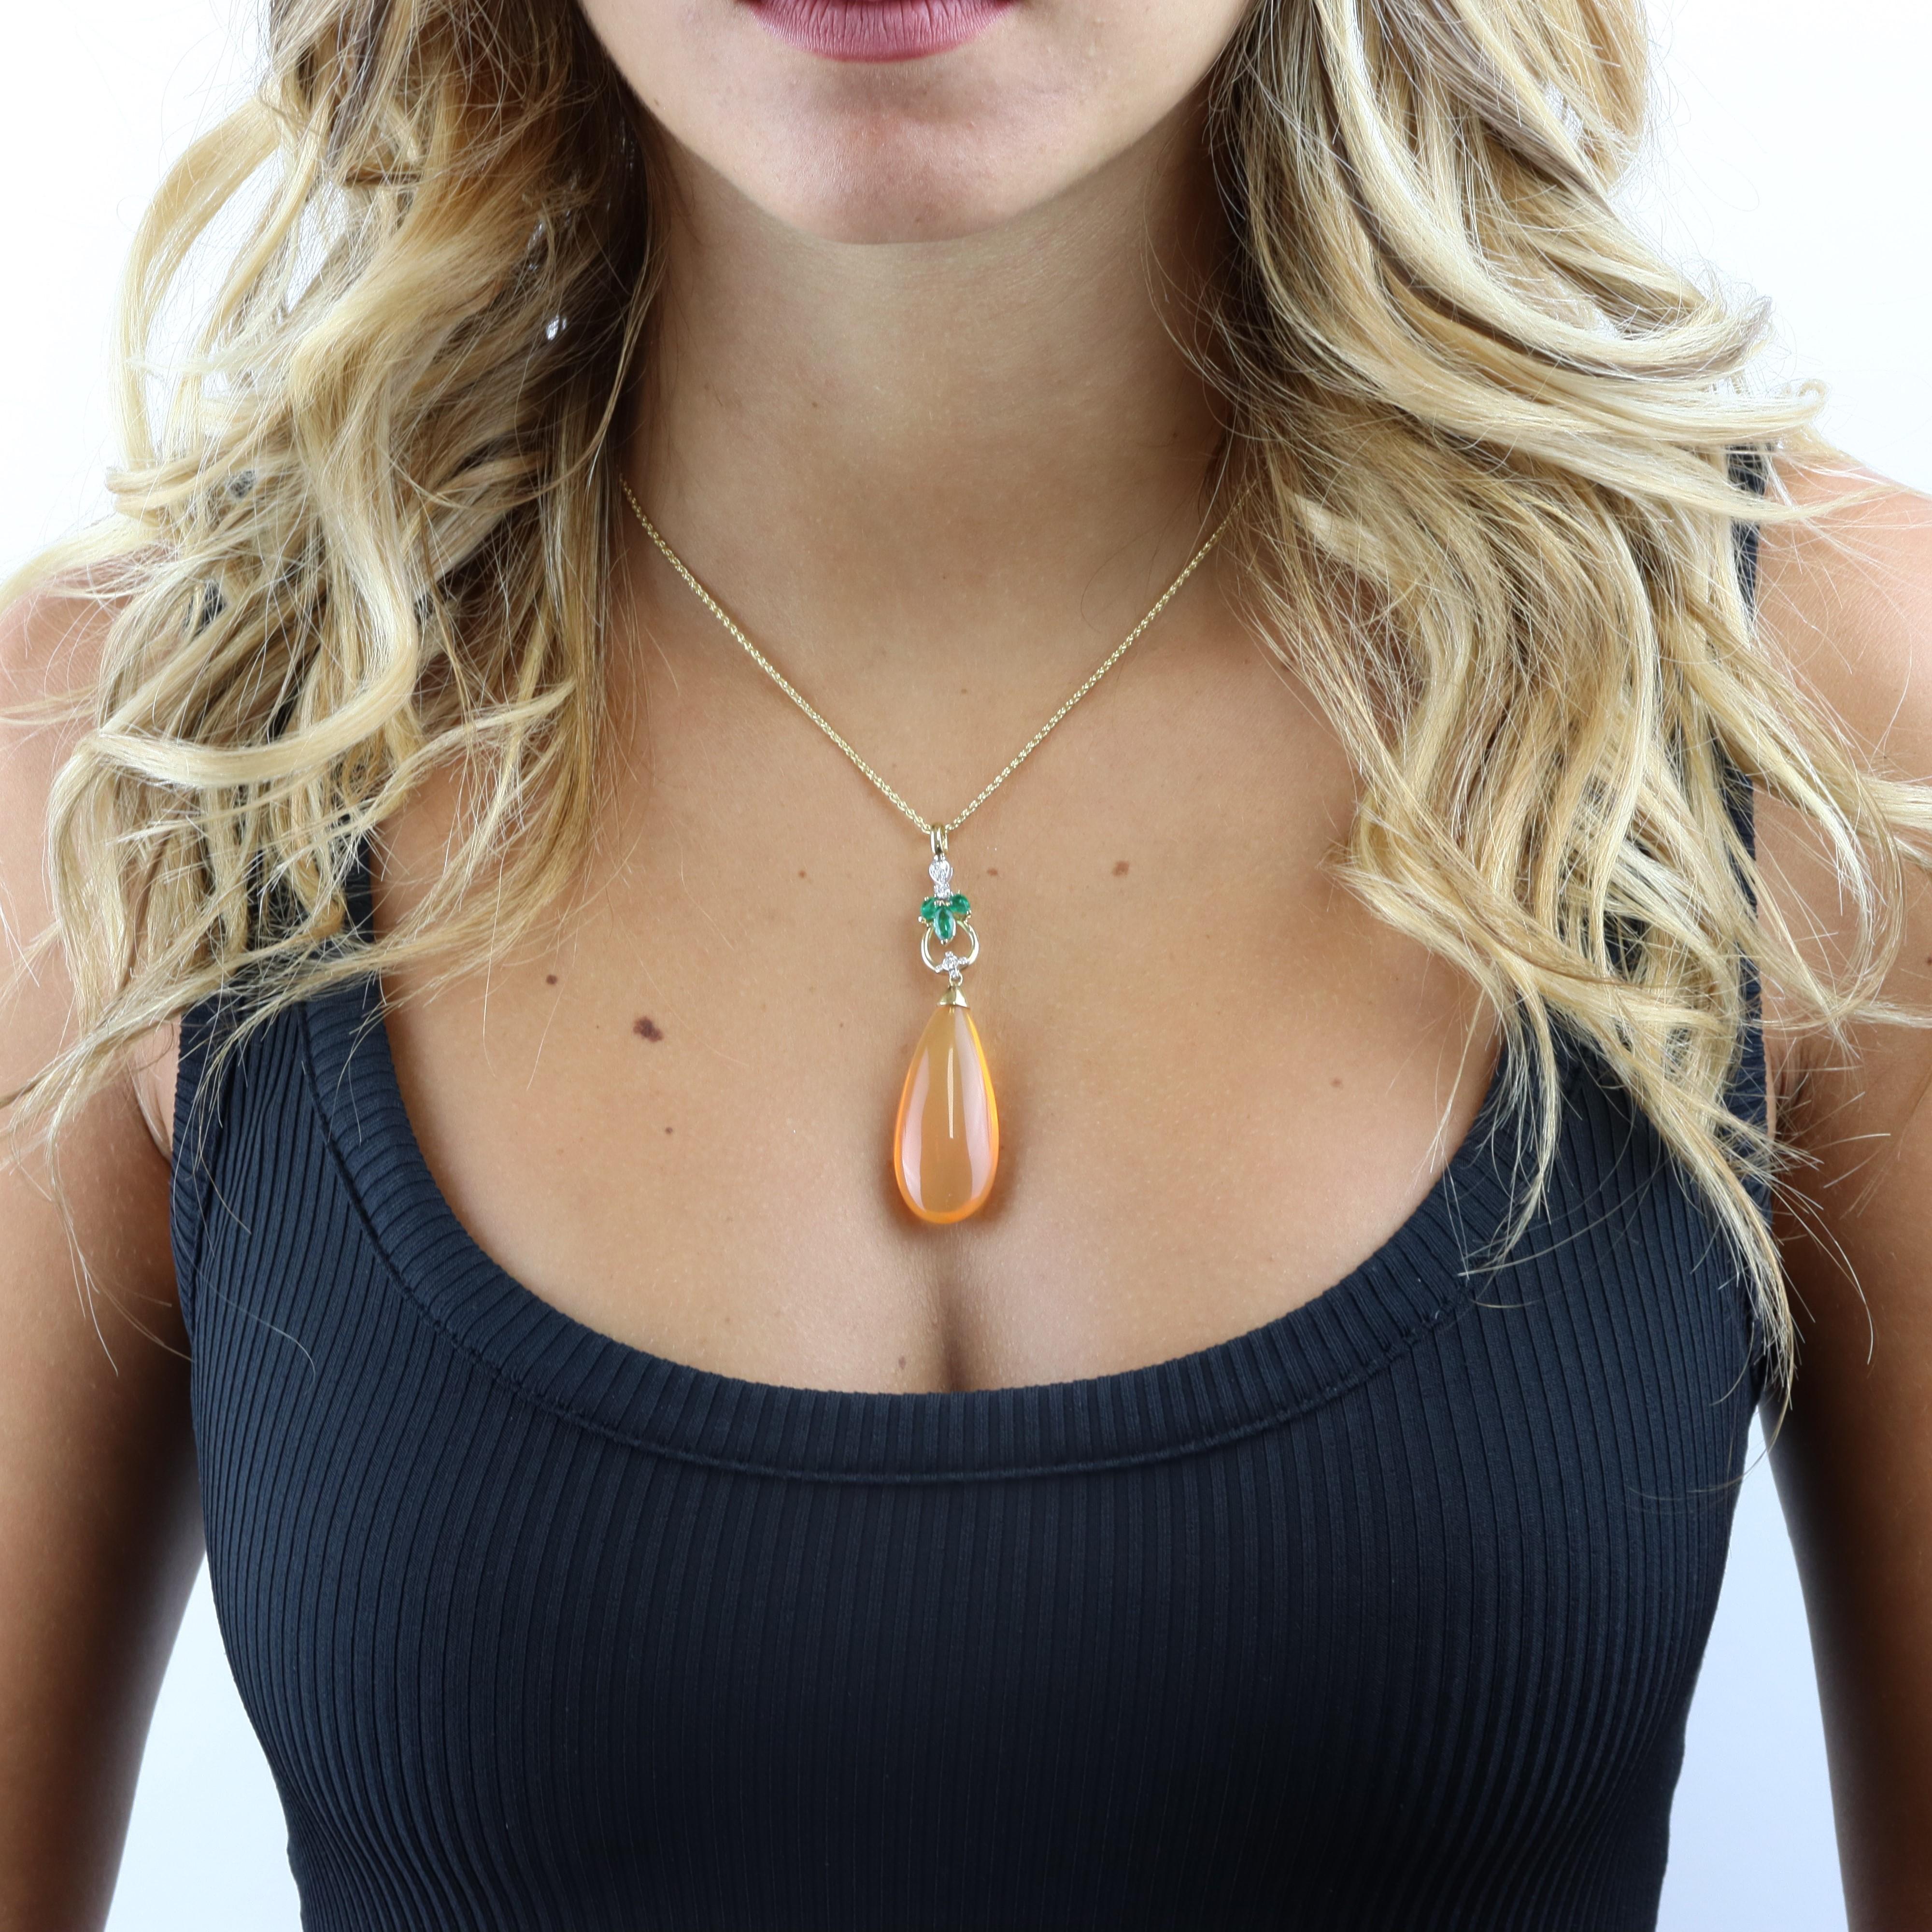 This gorgeous 18 Kt yellow and white gold pendant necklace features a drop-shaped opal. It is further embellished with emerald and diamond accents to complete the sophisticated, feminine look. The Arab peoples deem opal a gift from the heavens. The